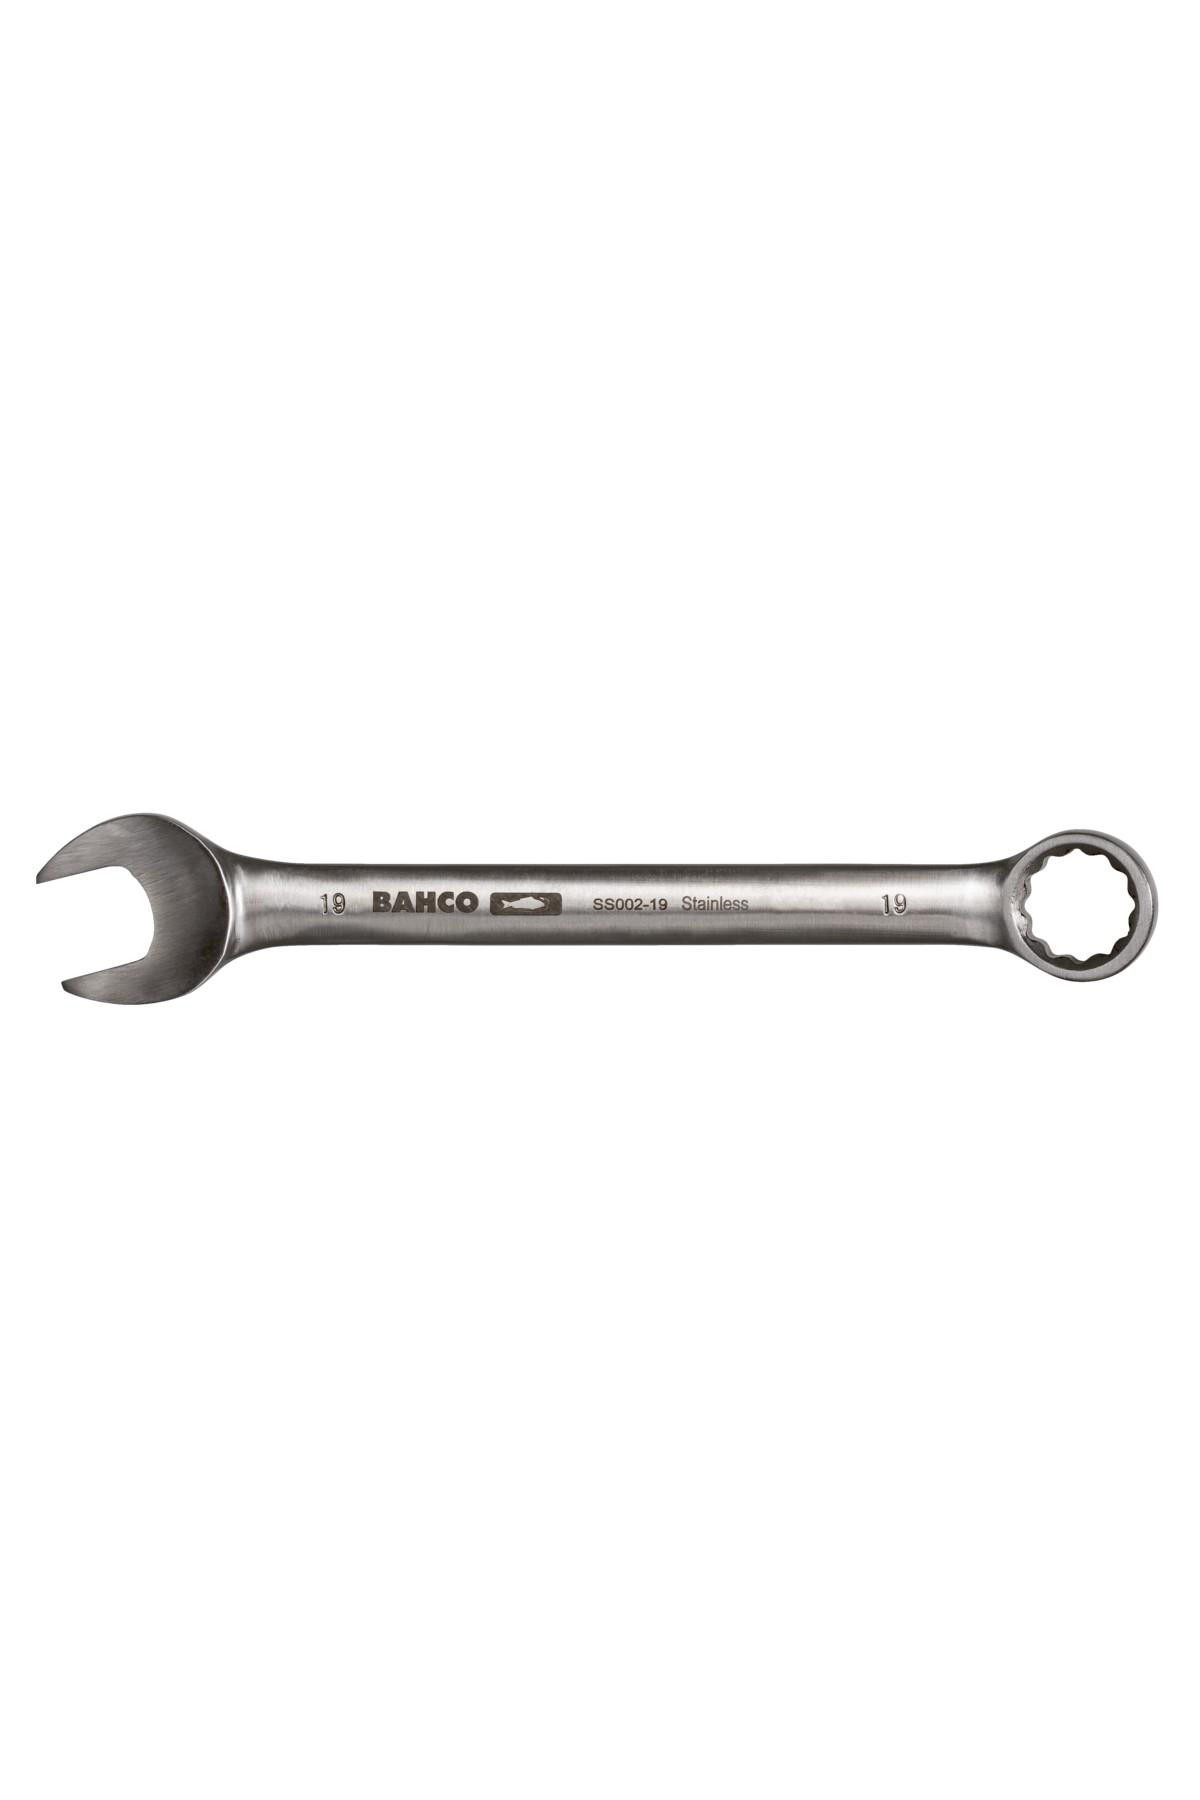 Ring spanner stainless steel SS003 15/16